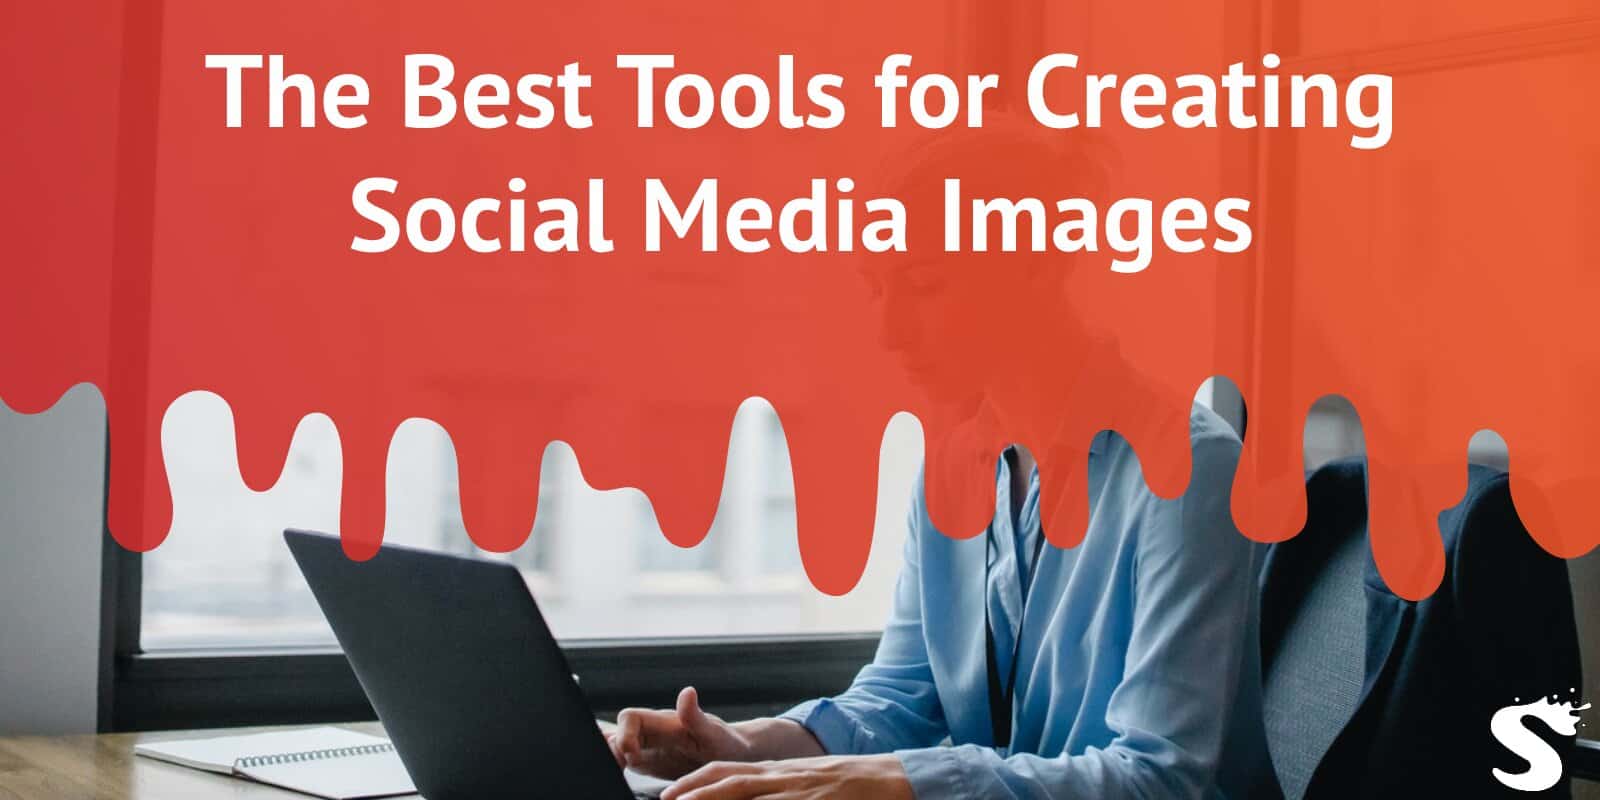 The Best Tools for Creating Social Media Images